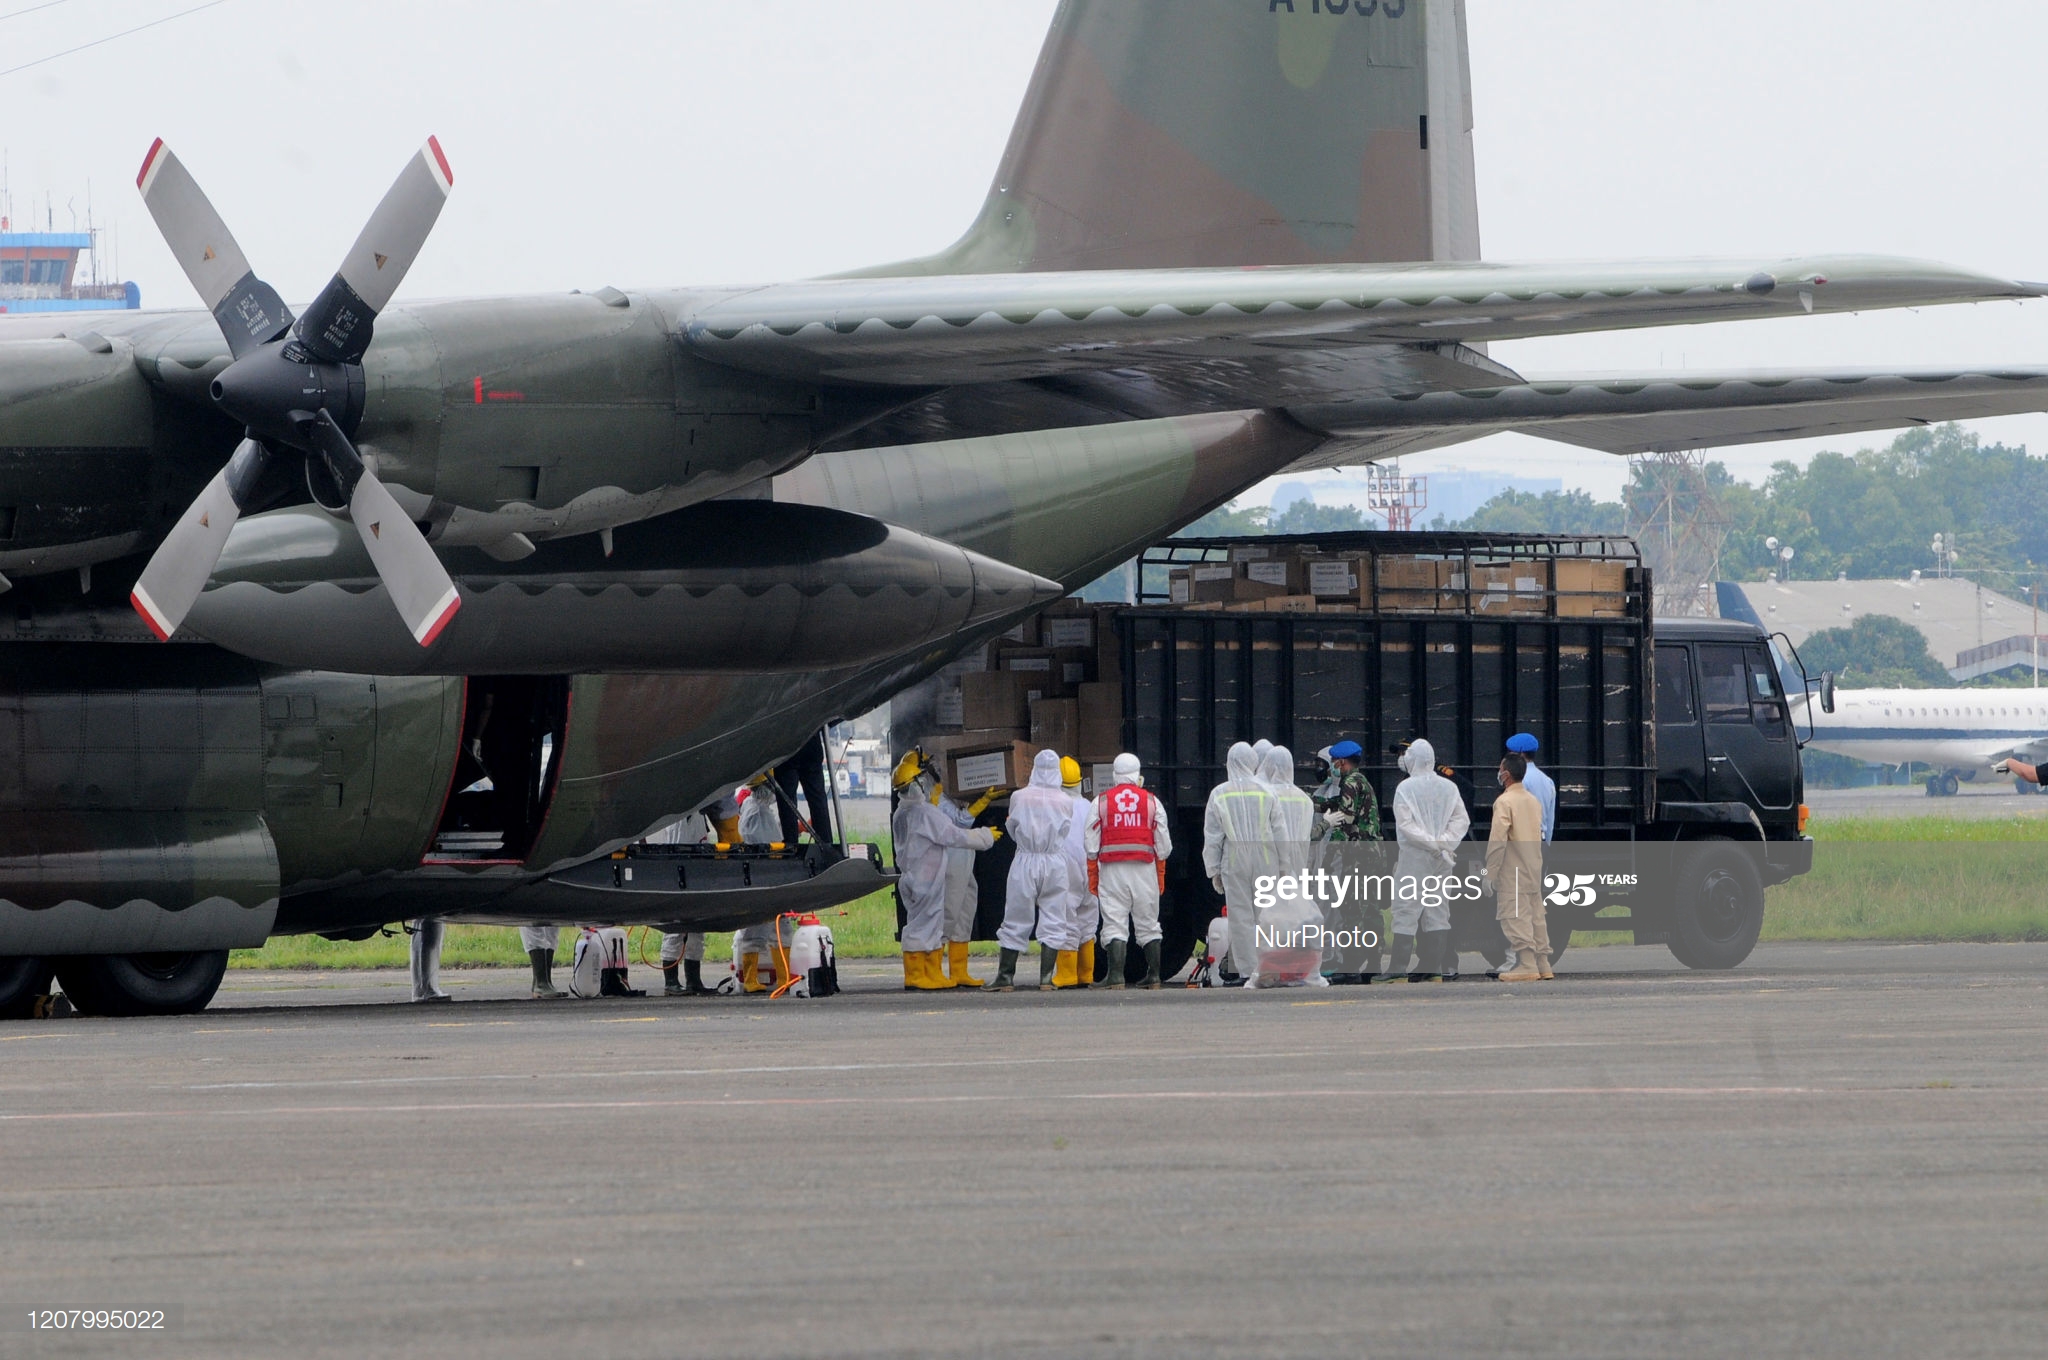 indonesian-air-force-c130-hercules-aircraft-carrying-covid19-medical-picture-id1207995022